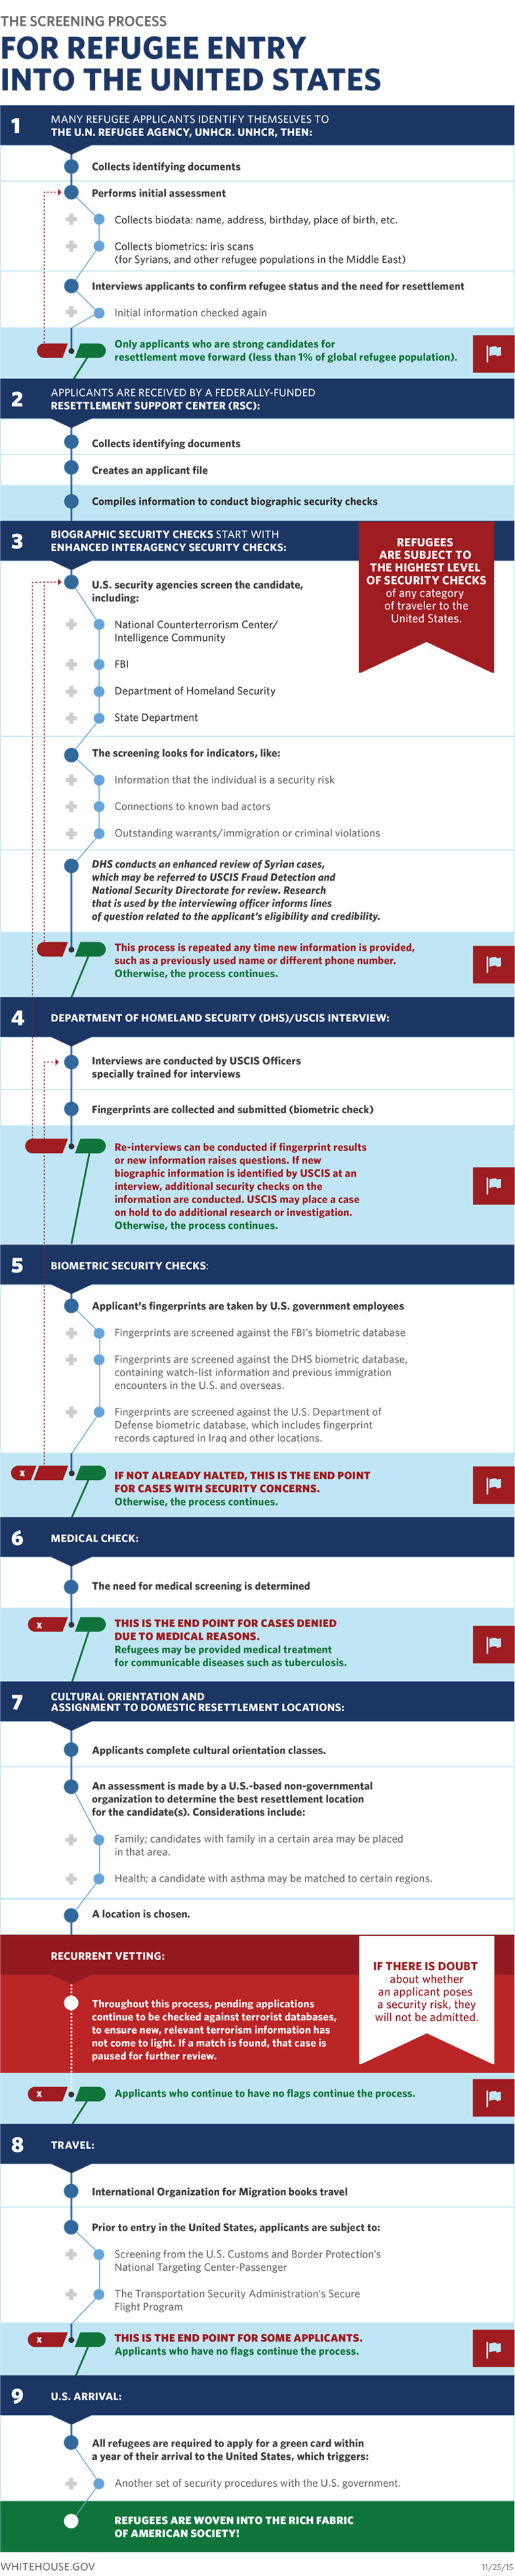 Infographic showing the screening process for refugees entering the US